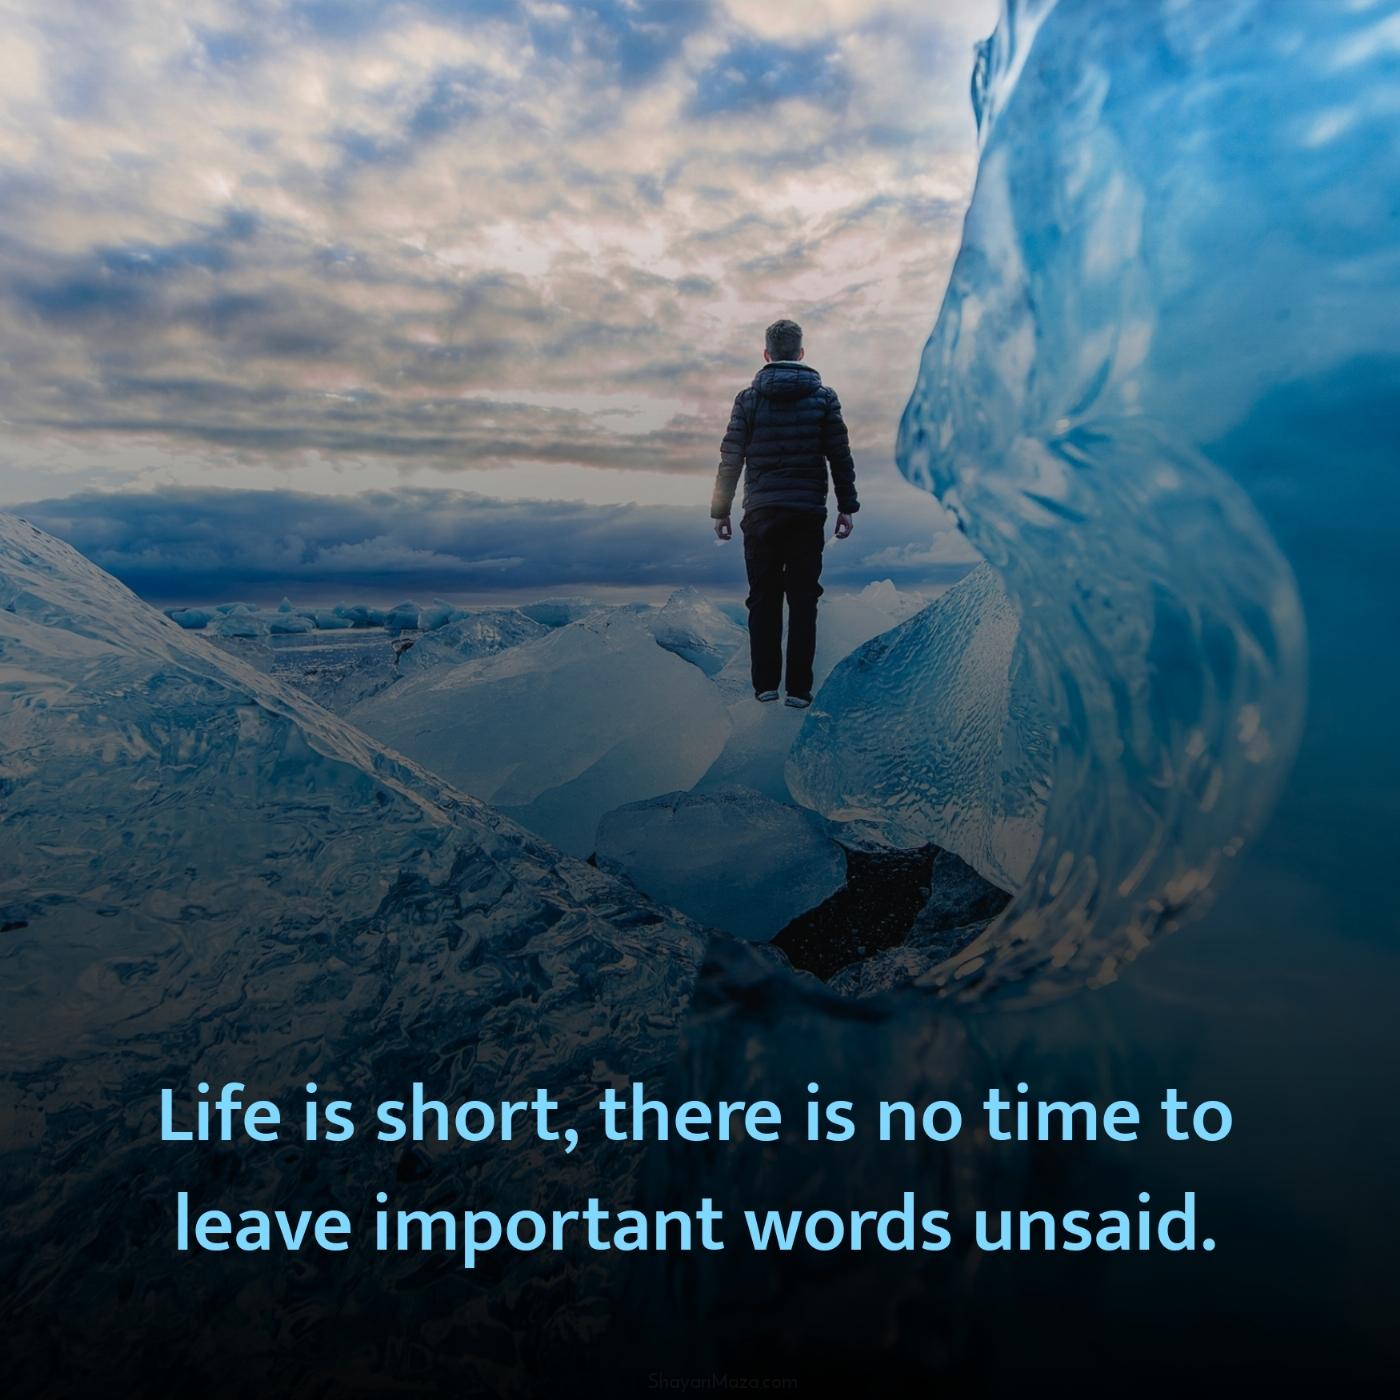 Life is short there is no time to leave important words unsaid